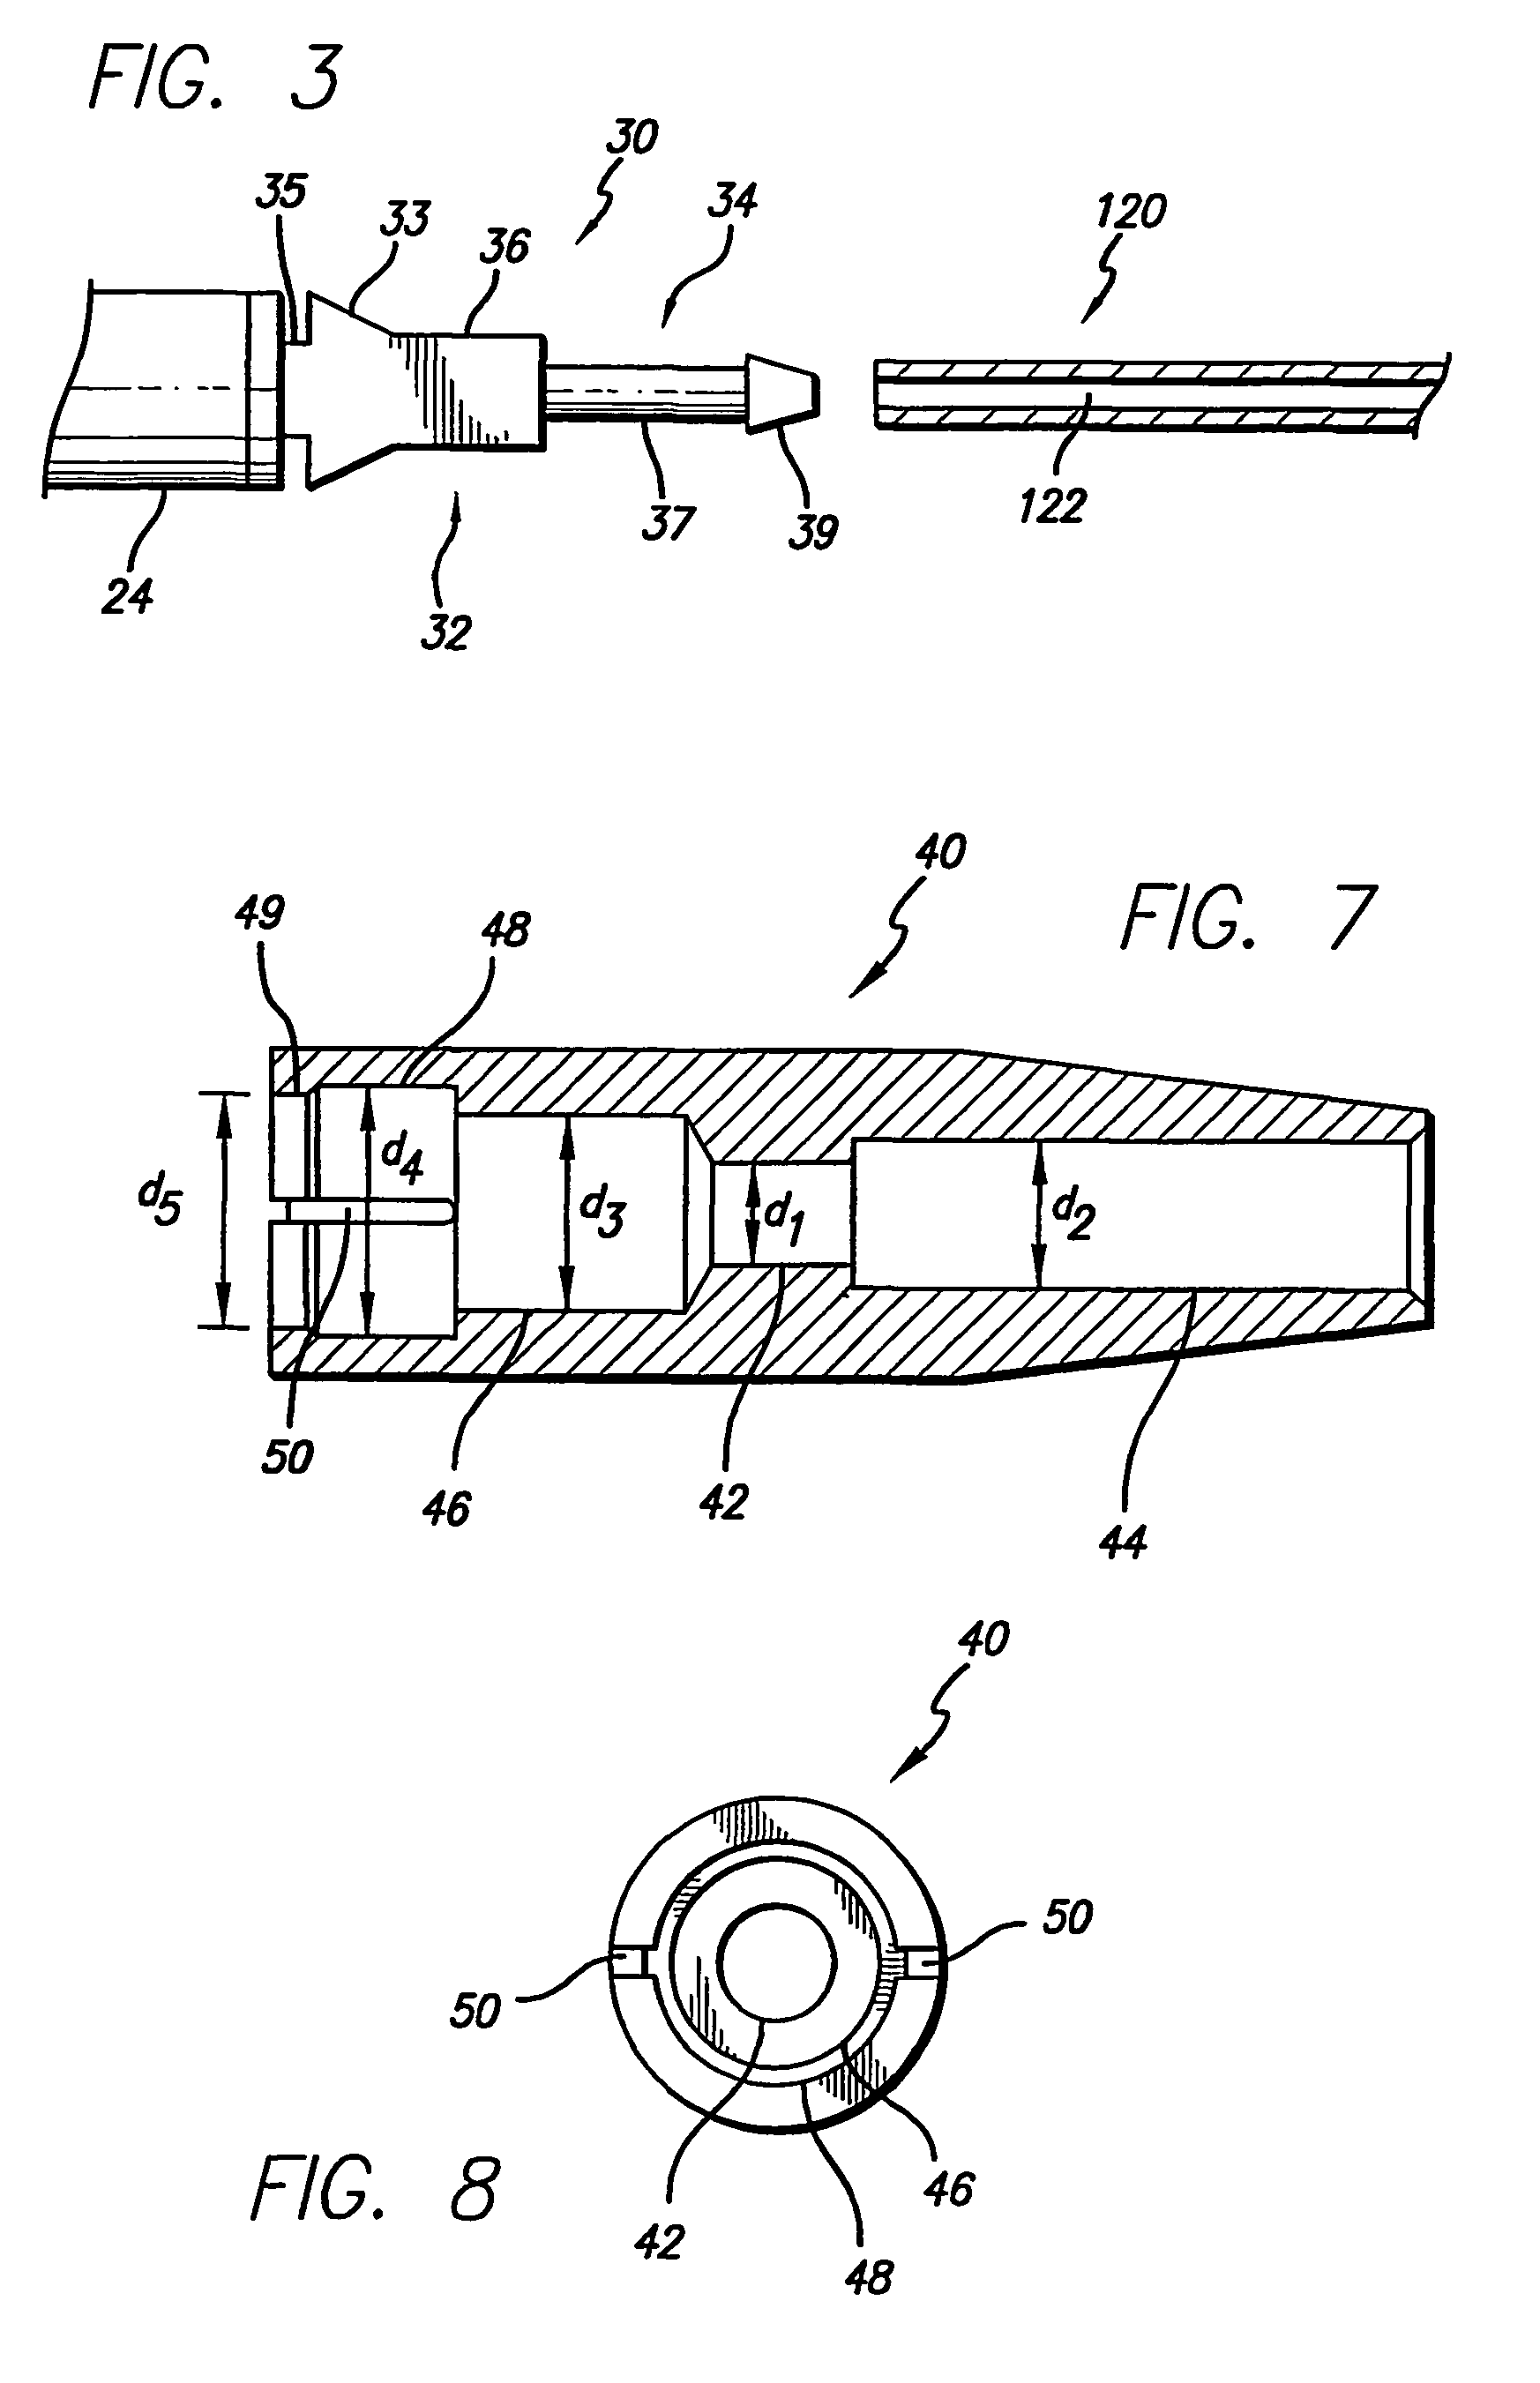 Connector for catheter attachment to an implantable pump